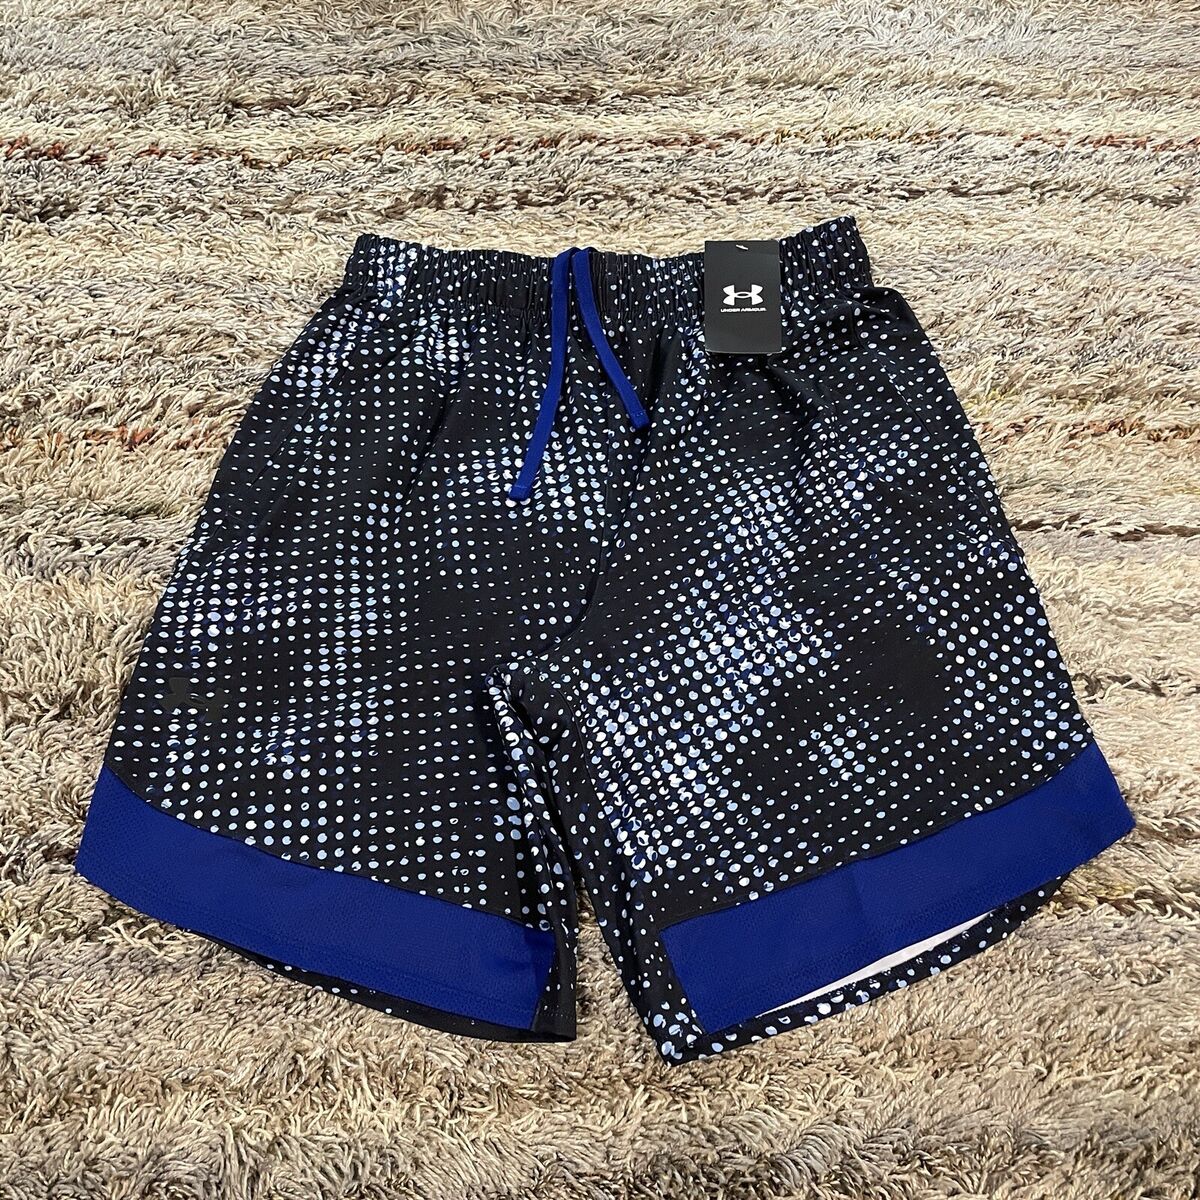 Under Armour Men's Train Stretch Printed Shorts - Blue, MD